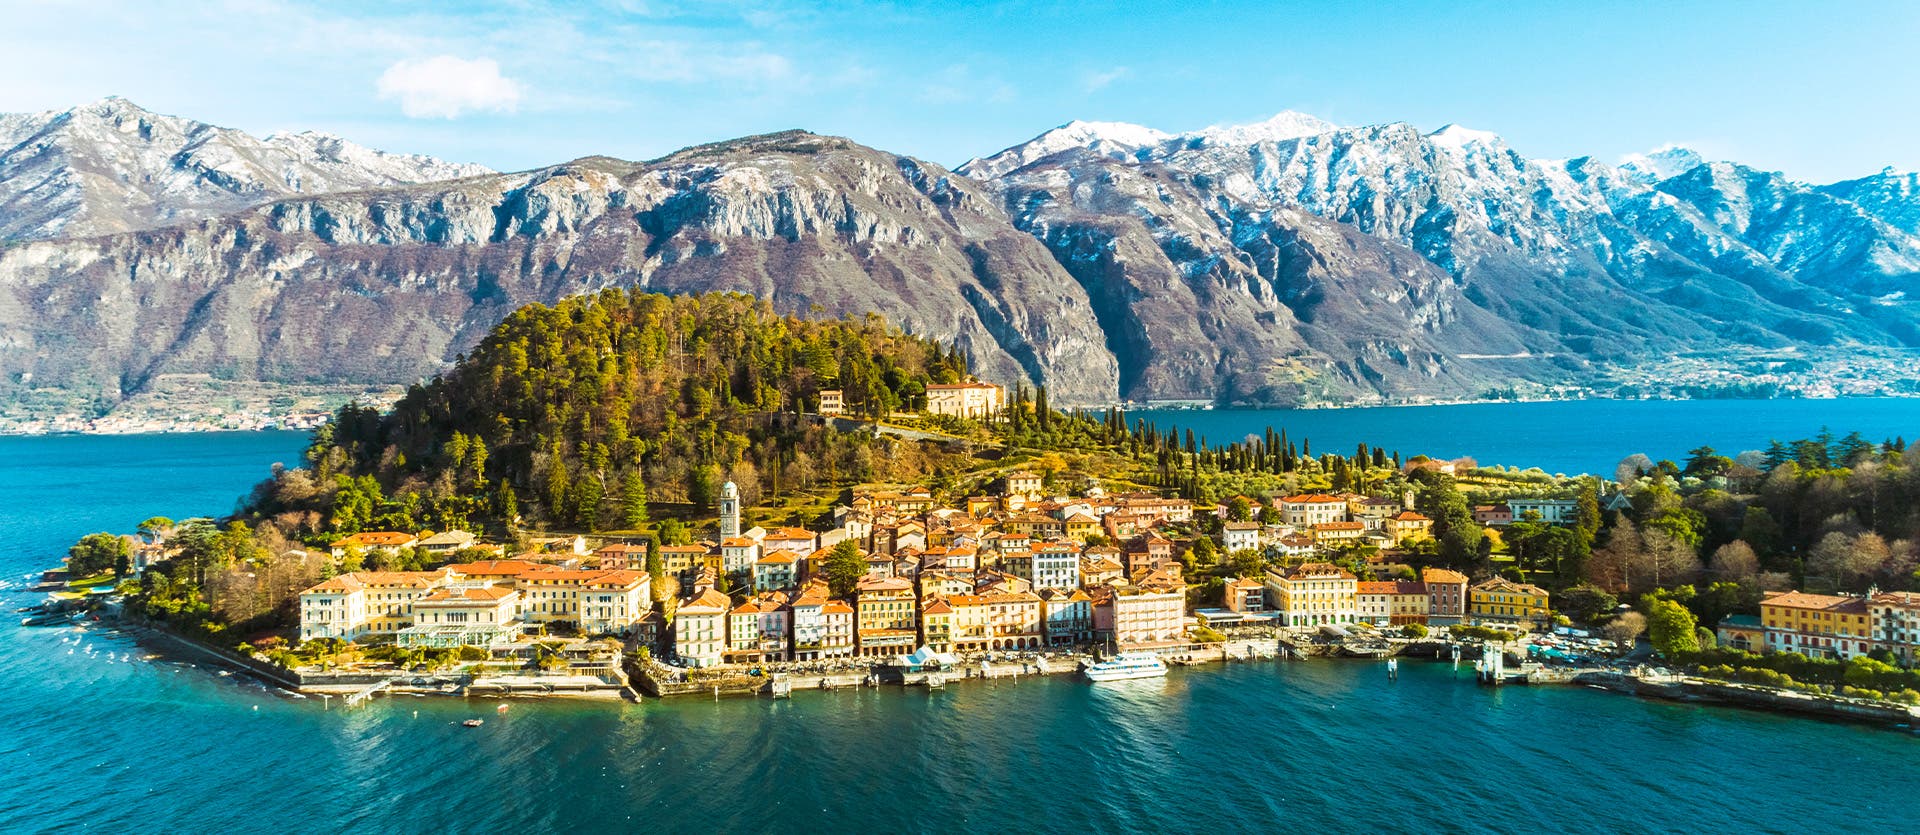 What to see in Italy Lake Como